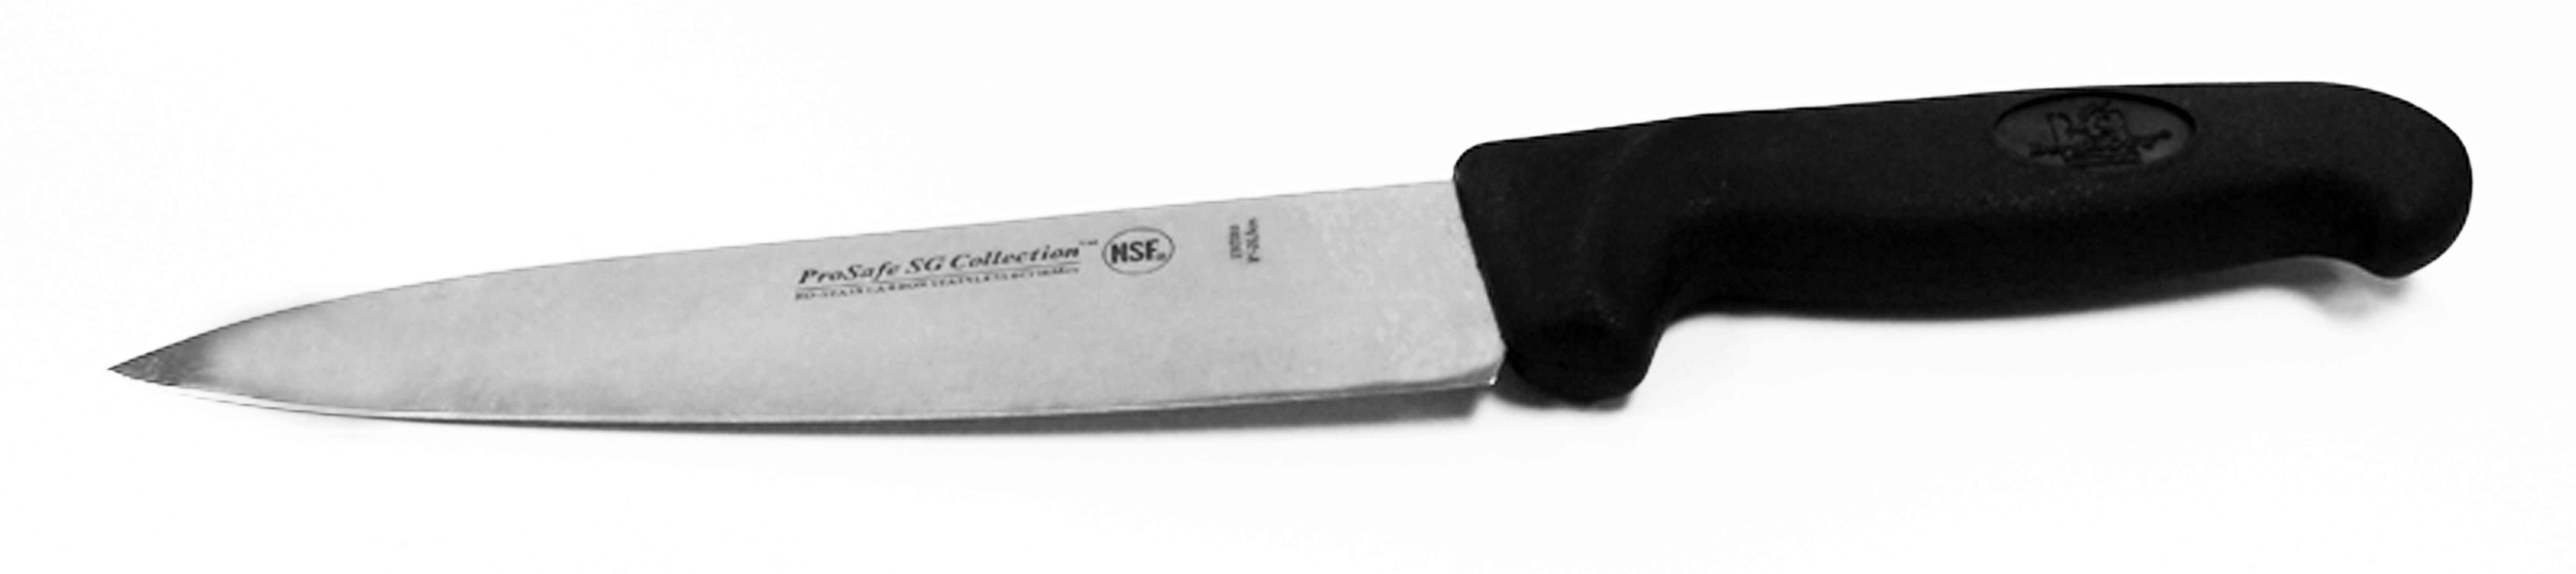 Soft Grip Chef's Knife 8"